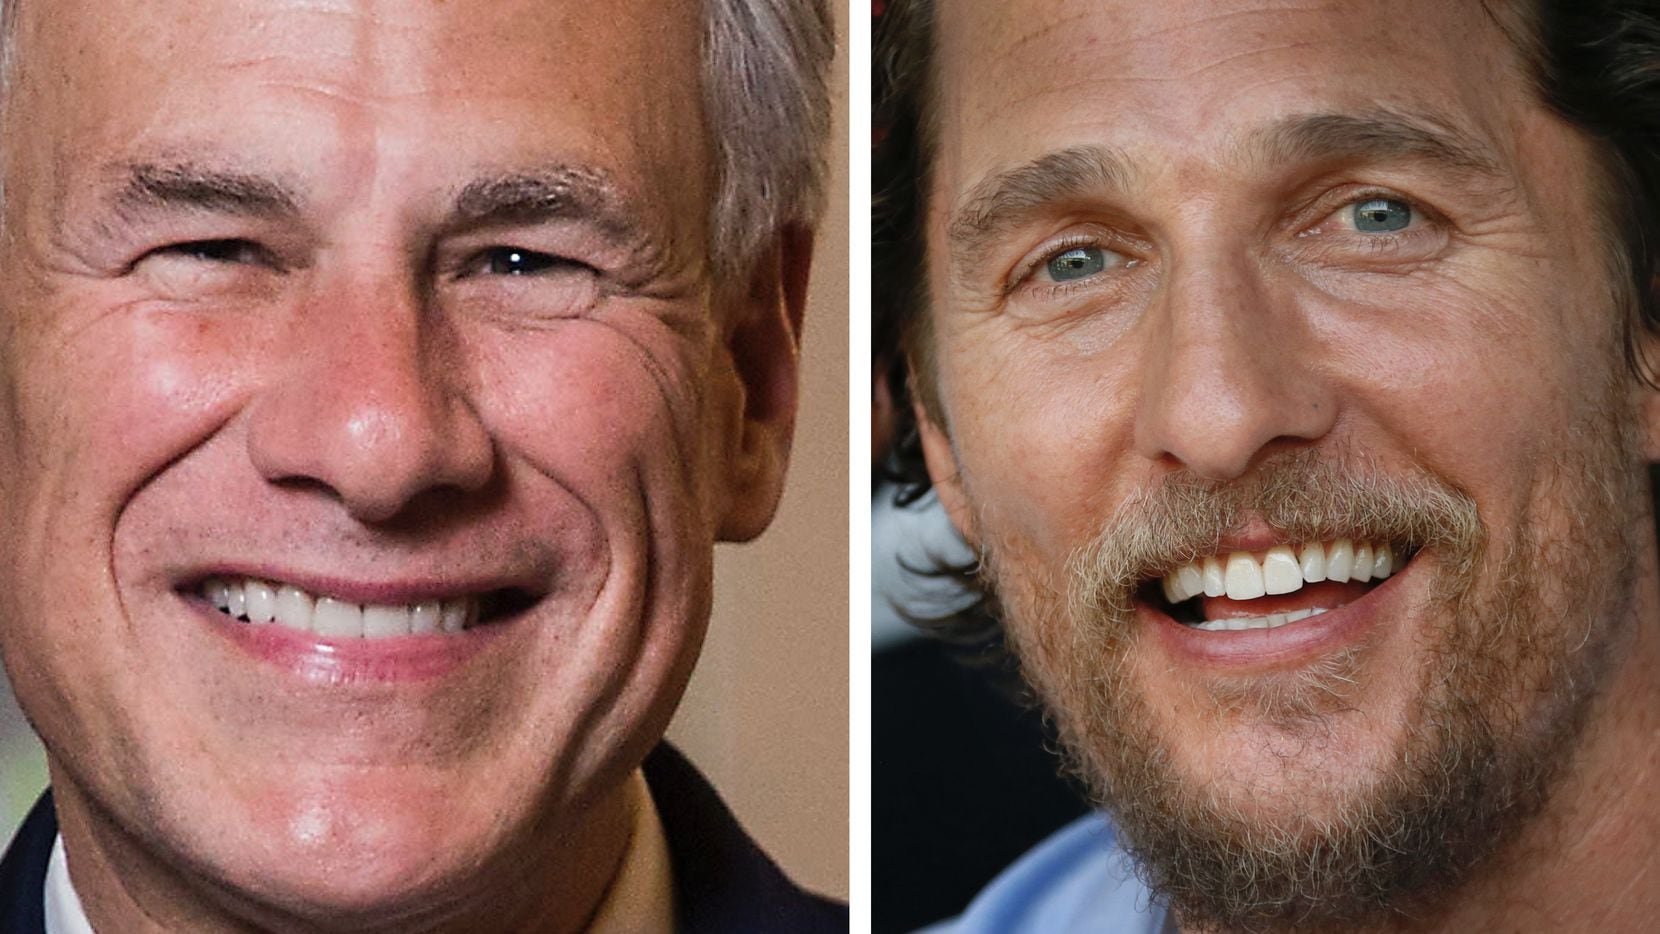 Oscar-winning actor Matthew McConaughey, who says he's considering a run for governor of Texas, holds an edge over incumbent GOP Gov. Greg Abbott, according to a poll released Sunday by The Dallas Morning News and the University of Texas at Tyler. (DMN Staff pictures)